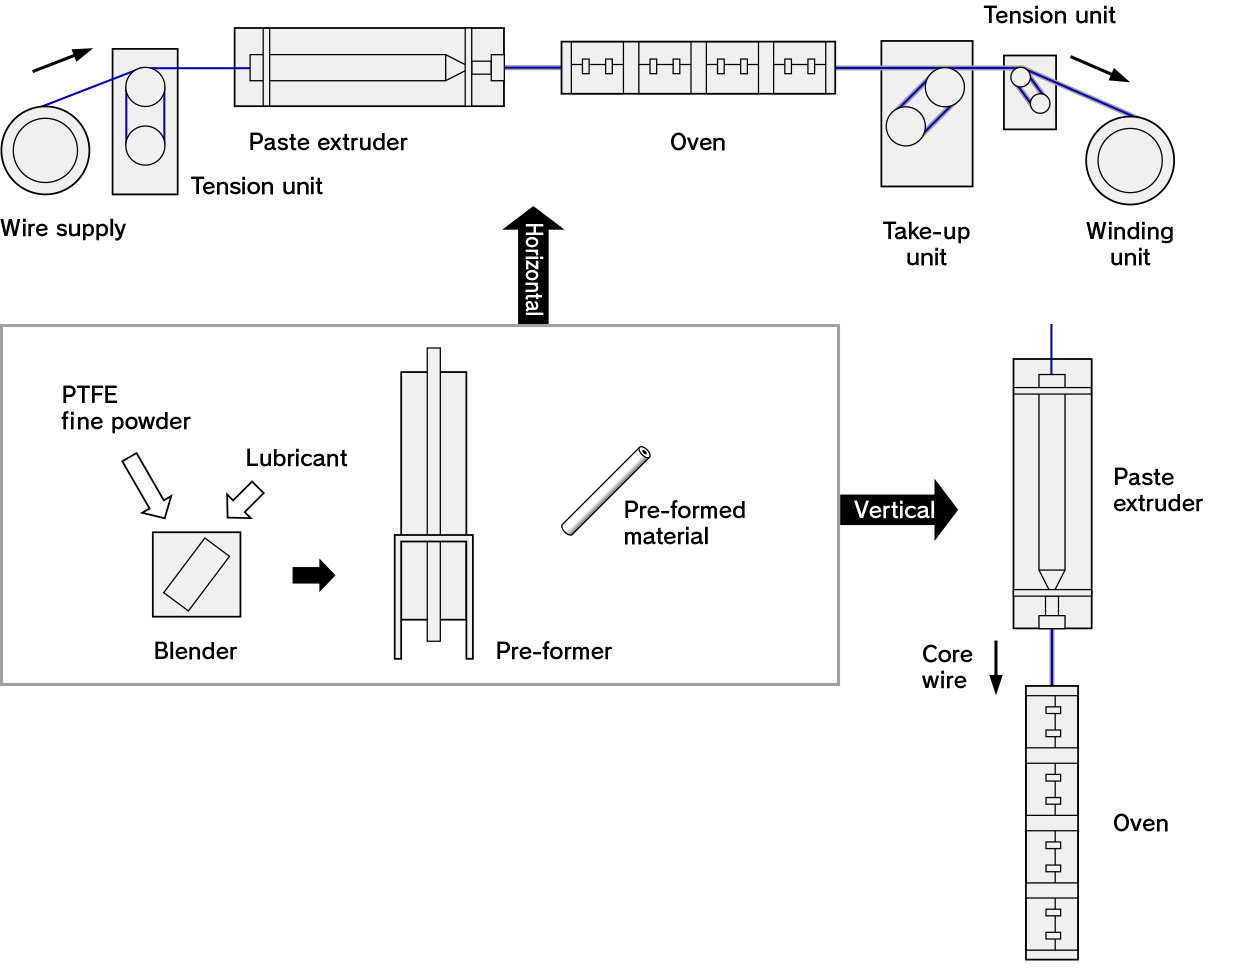 TABATA INDUSTRIAL MACHINERY_Fluororesin (PTFE) Molding Device_Schematic diagram of wire coating molding equipment